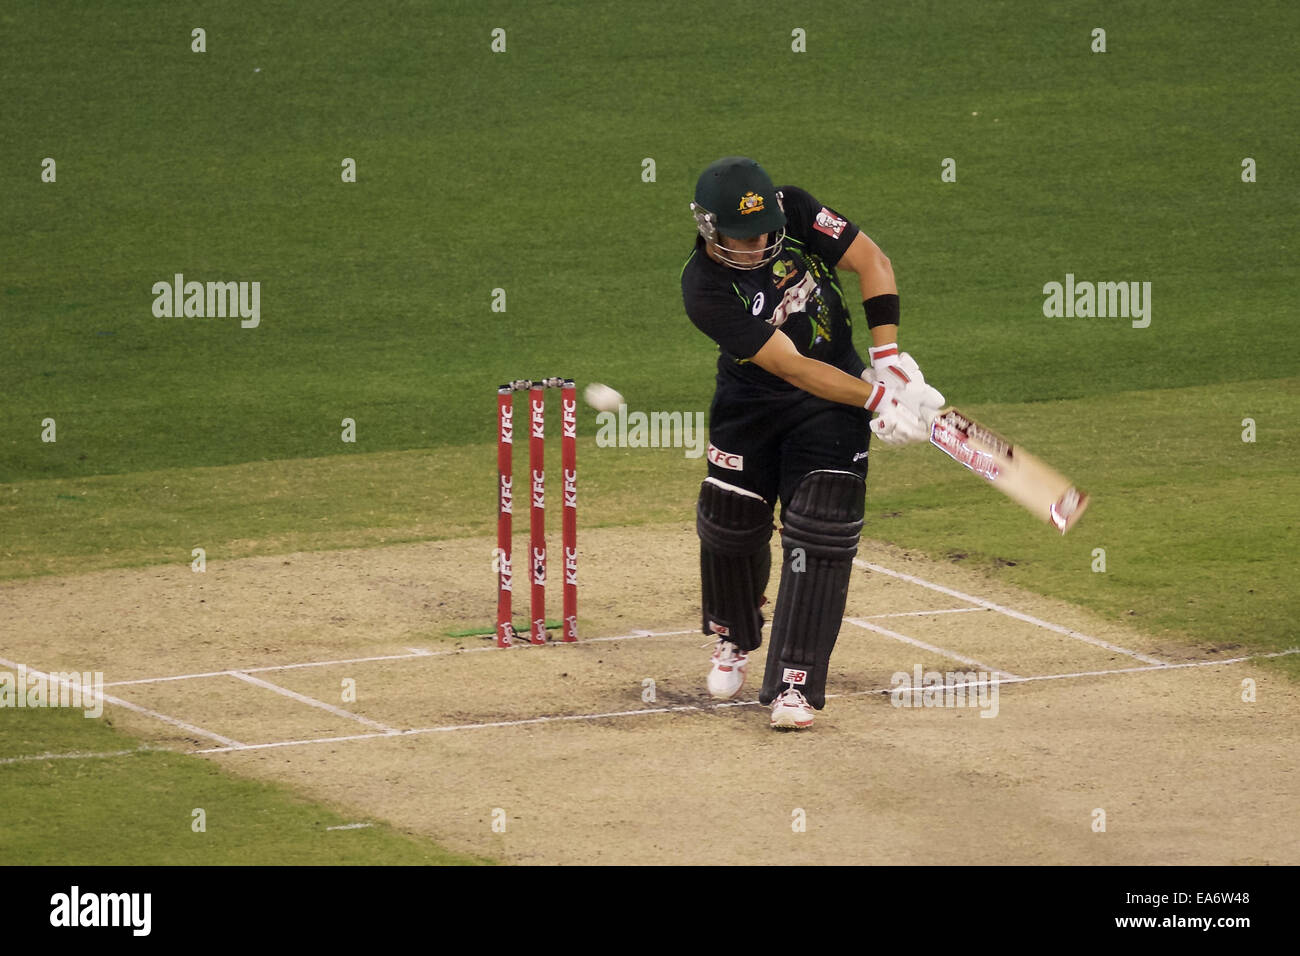 Melbourne, Victoria, Australia. 7th Nov, 2014. AARON FINCH of Australia plays at the ball and misses during game two of the International Twenty20 cricket series match between Australia and South Africa at the MCG. Credit:  Tom Griffiths/ZUMA Wire/Alamy Live News Stock Photo